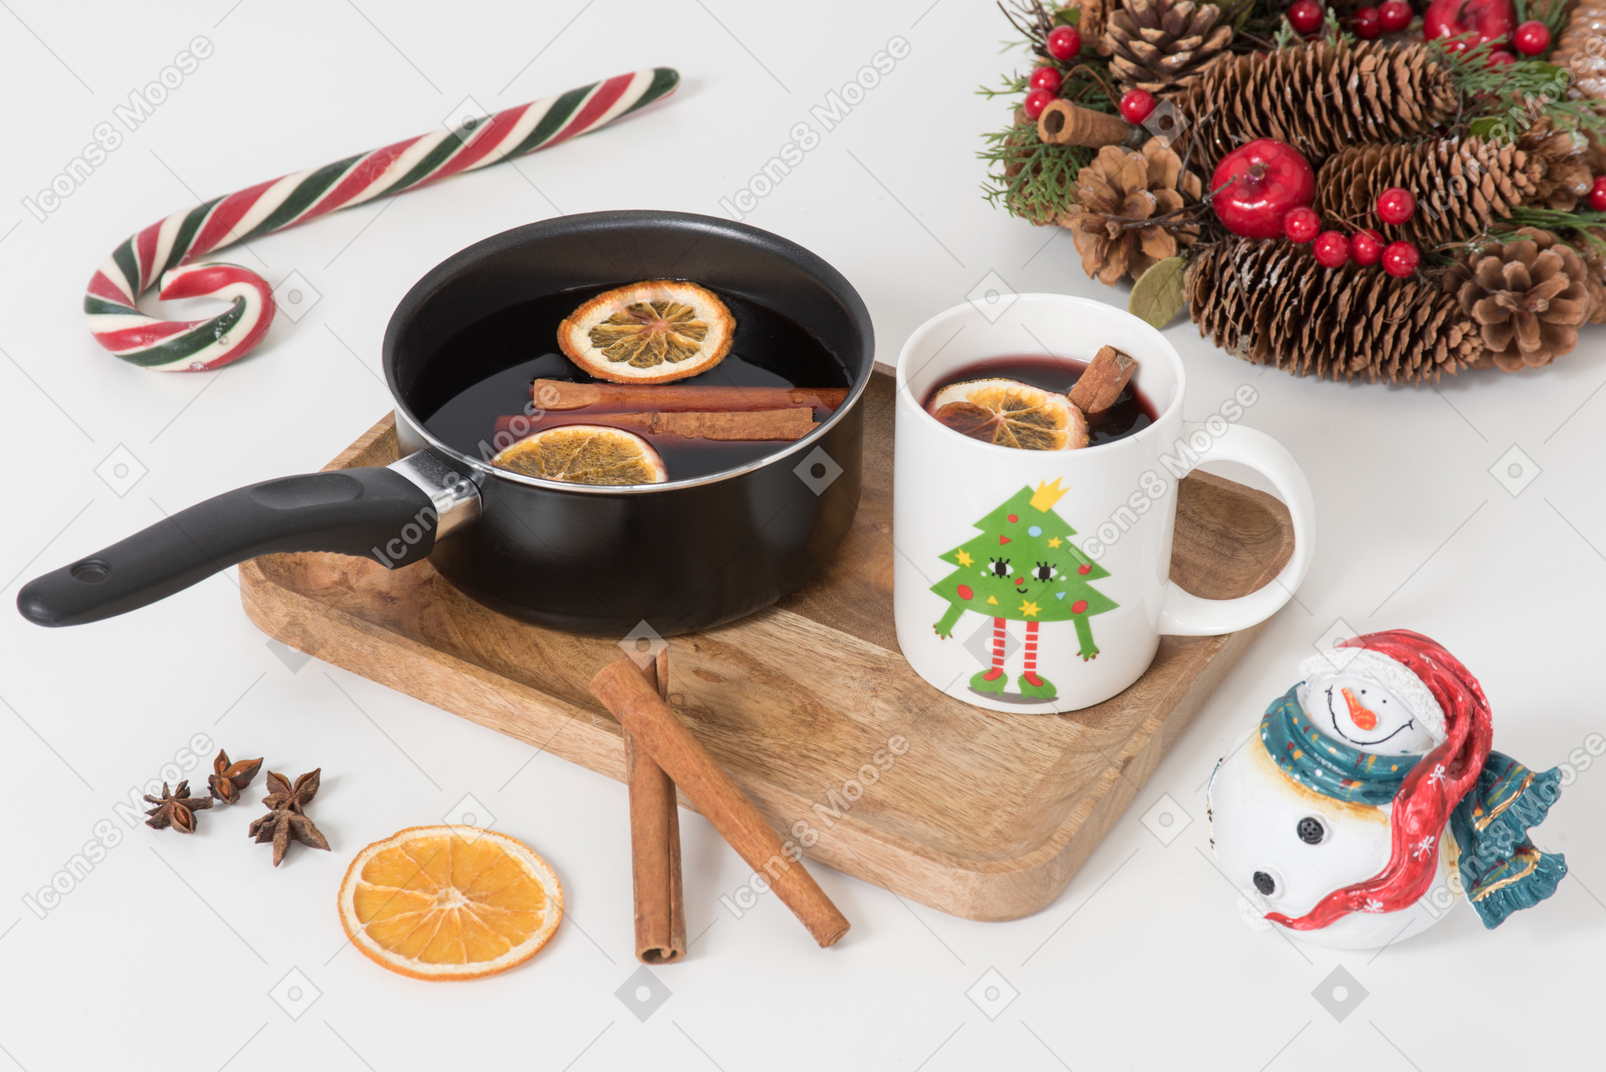 Cup and pan with mulled wine and christmas decorations near it